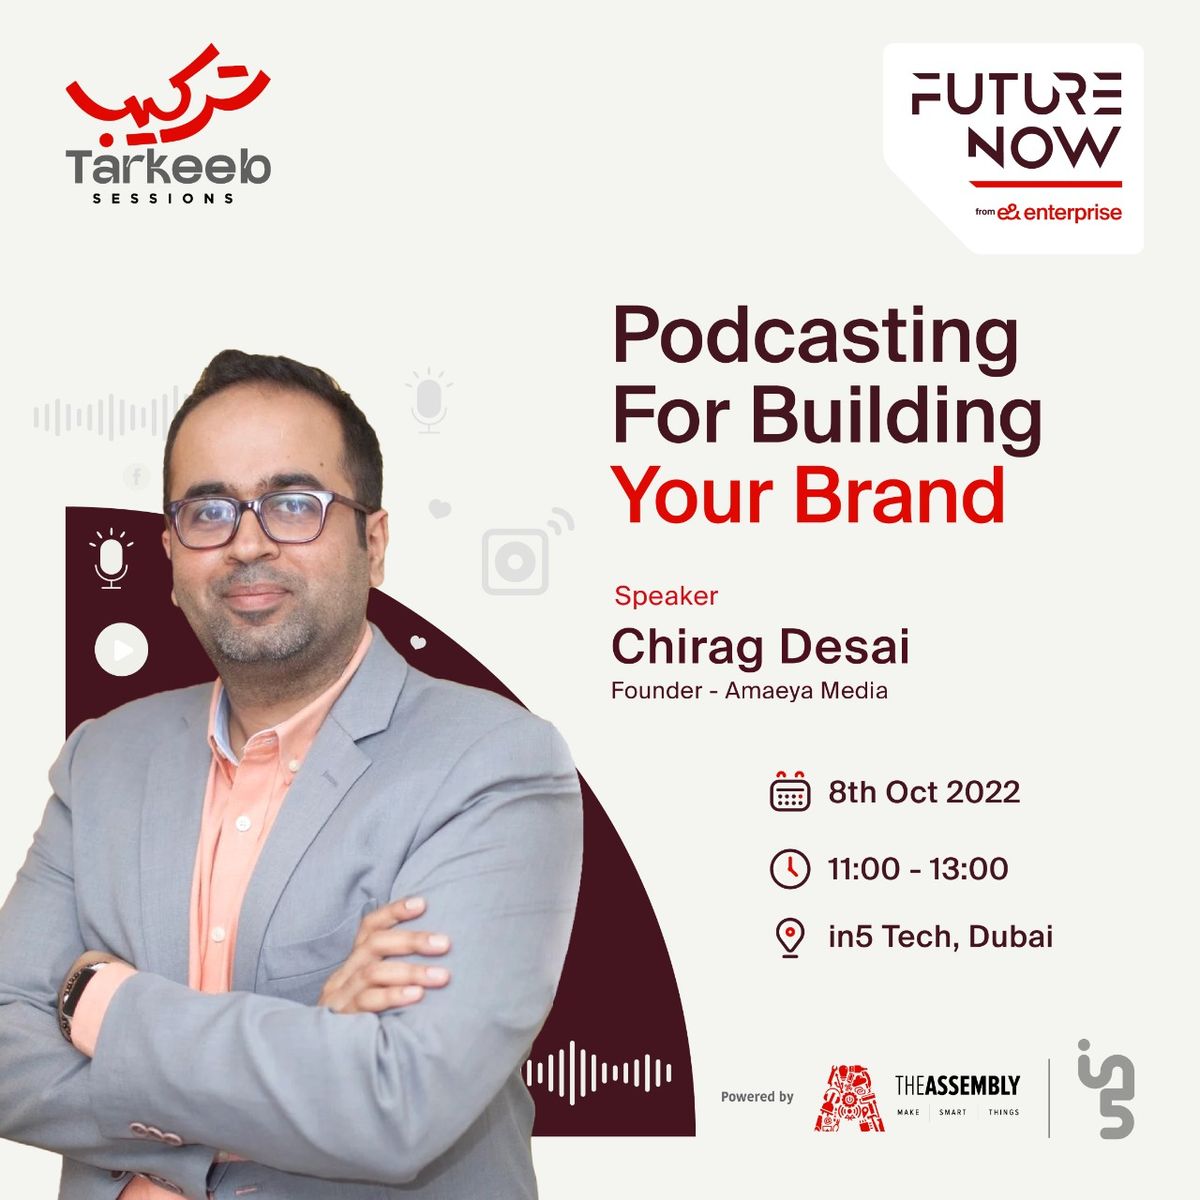 The podcast opportunity for your brand